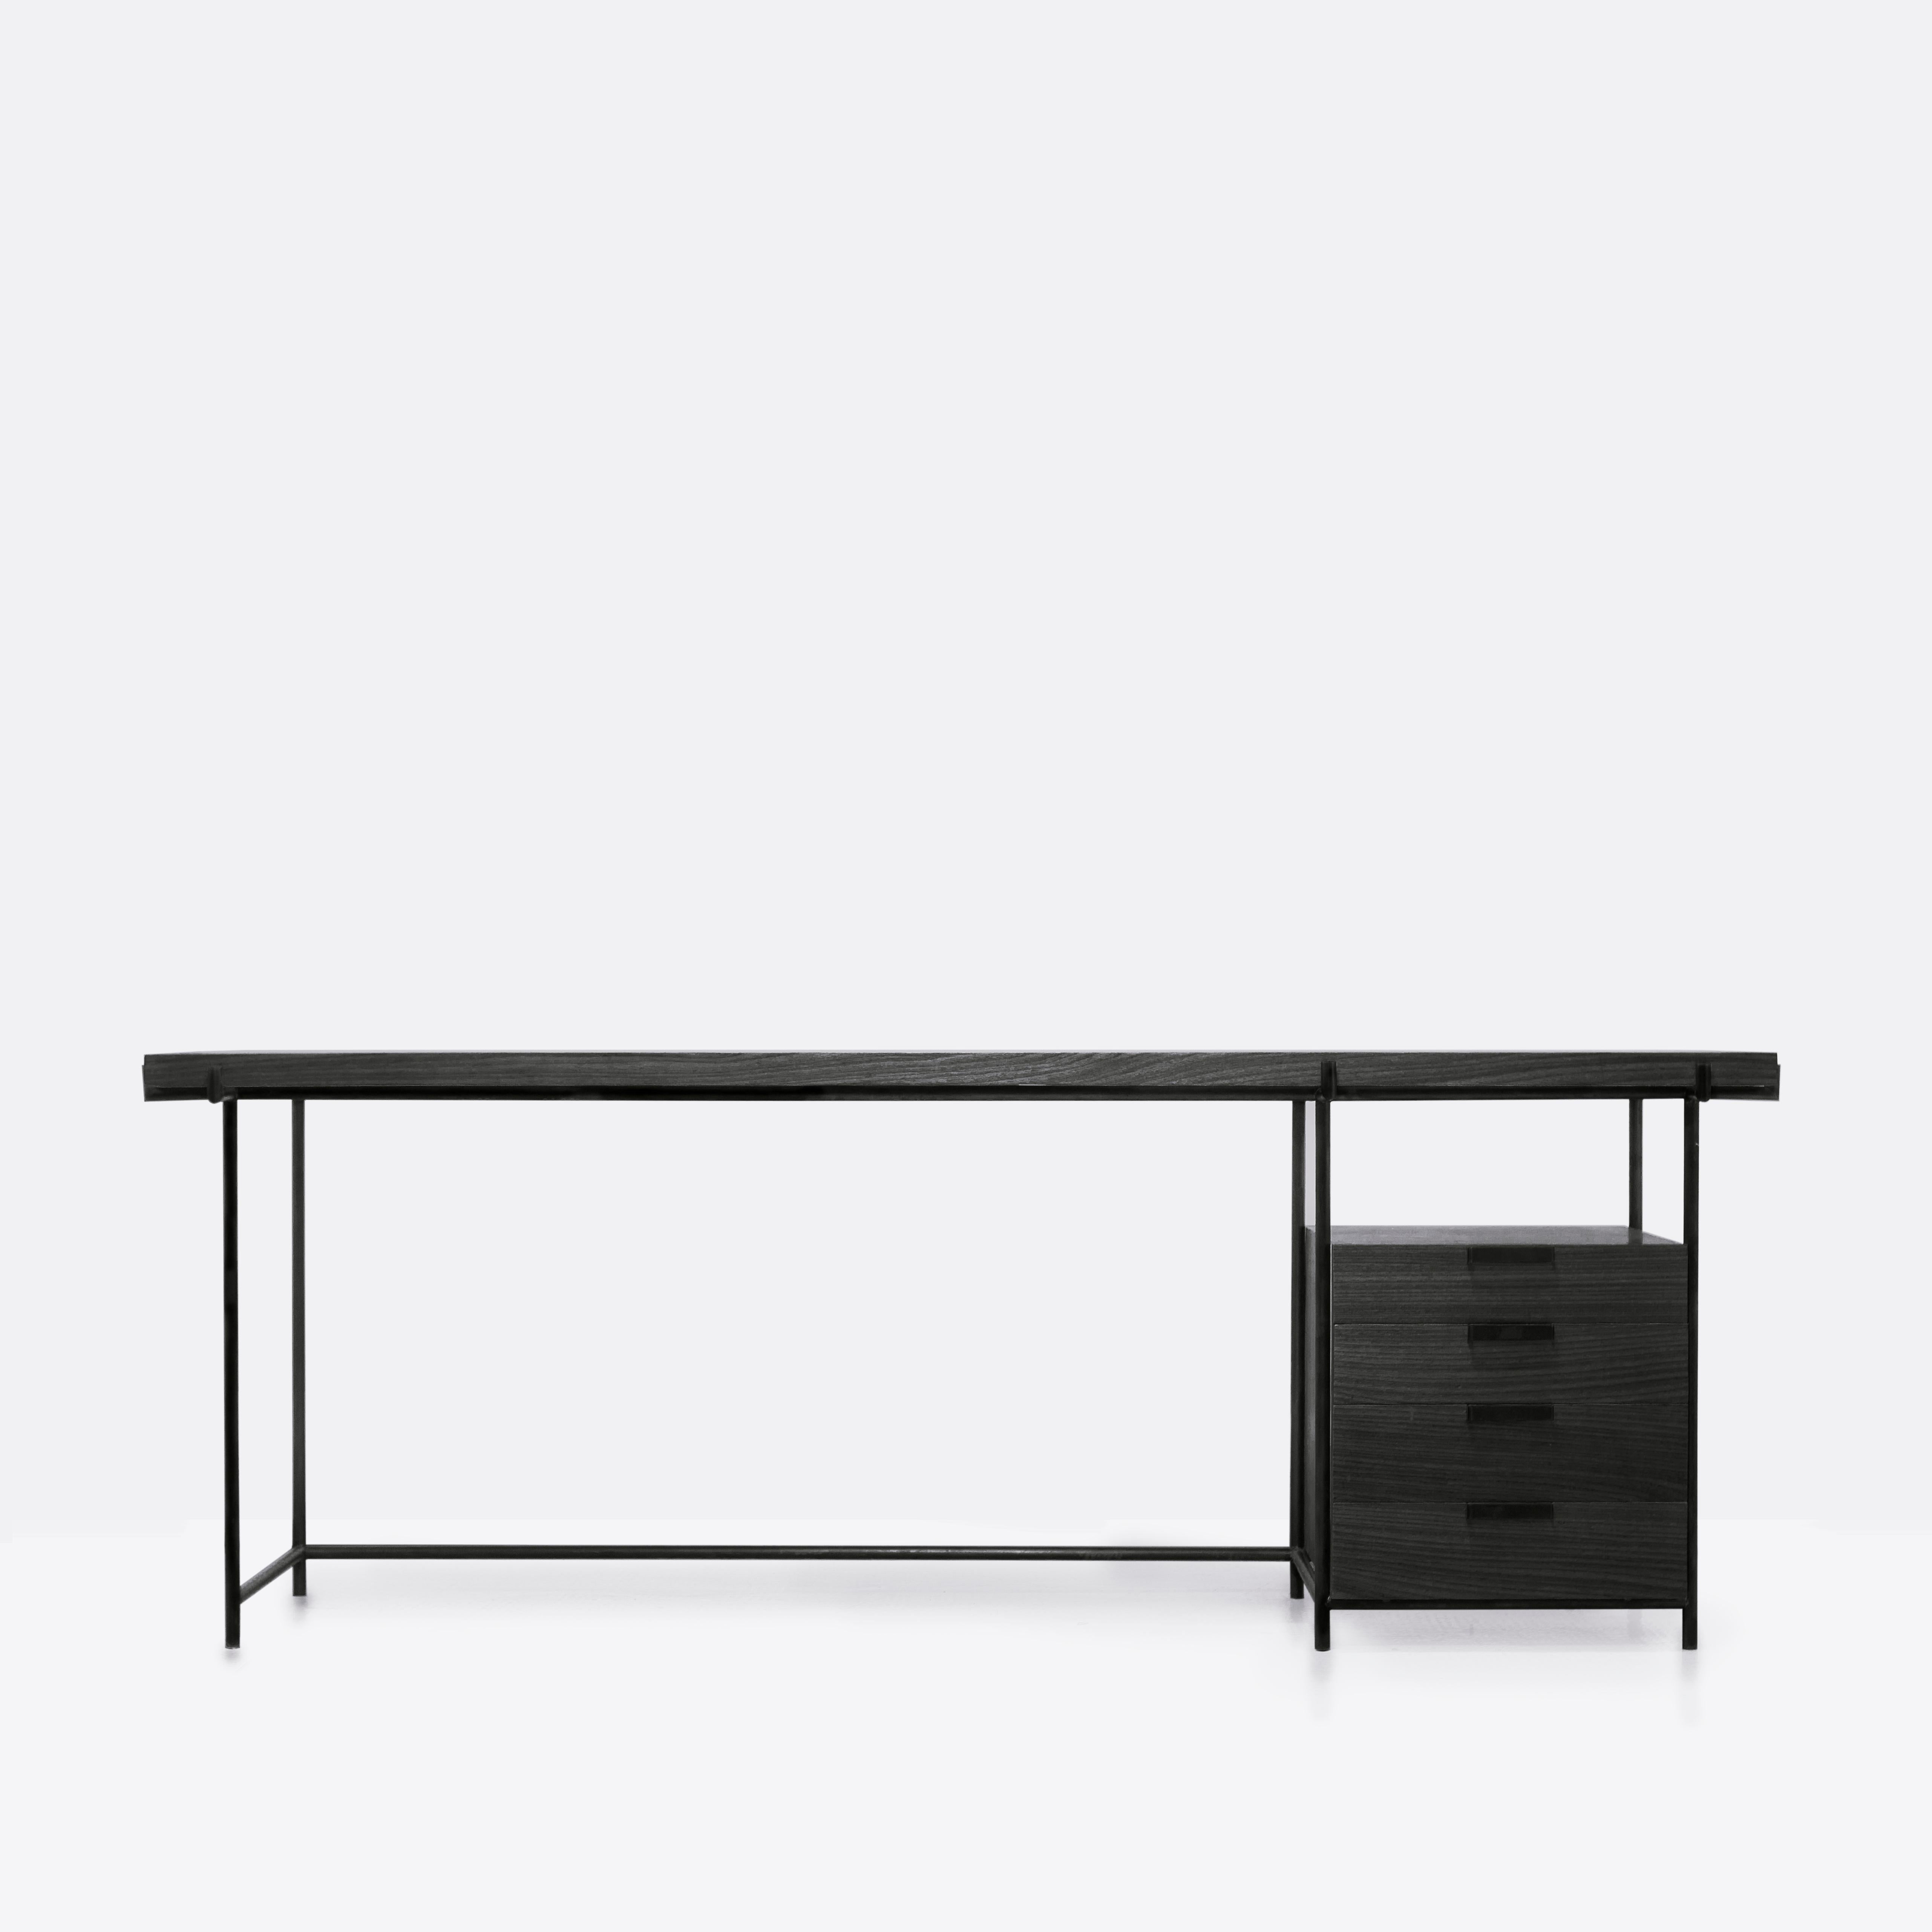 Marajoara desk is a study on modern utilitarian furniture with Brazilian Native Arte Reference.

In tribute to Lina Bo Bardi's design, this desk has a mixed esthetic of modernism with a touch of Brazilian Native's Culture. It has the quality of